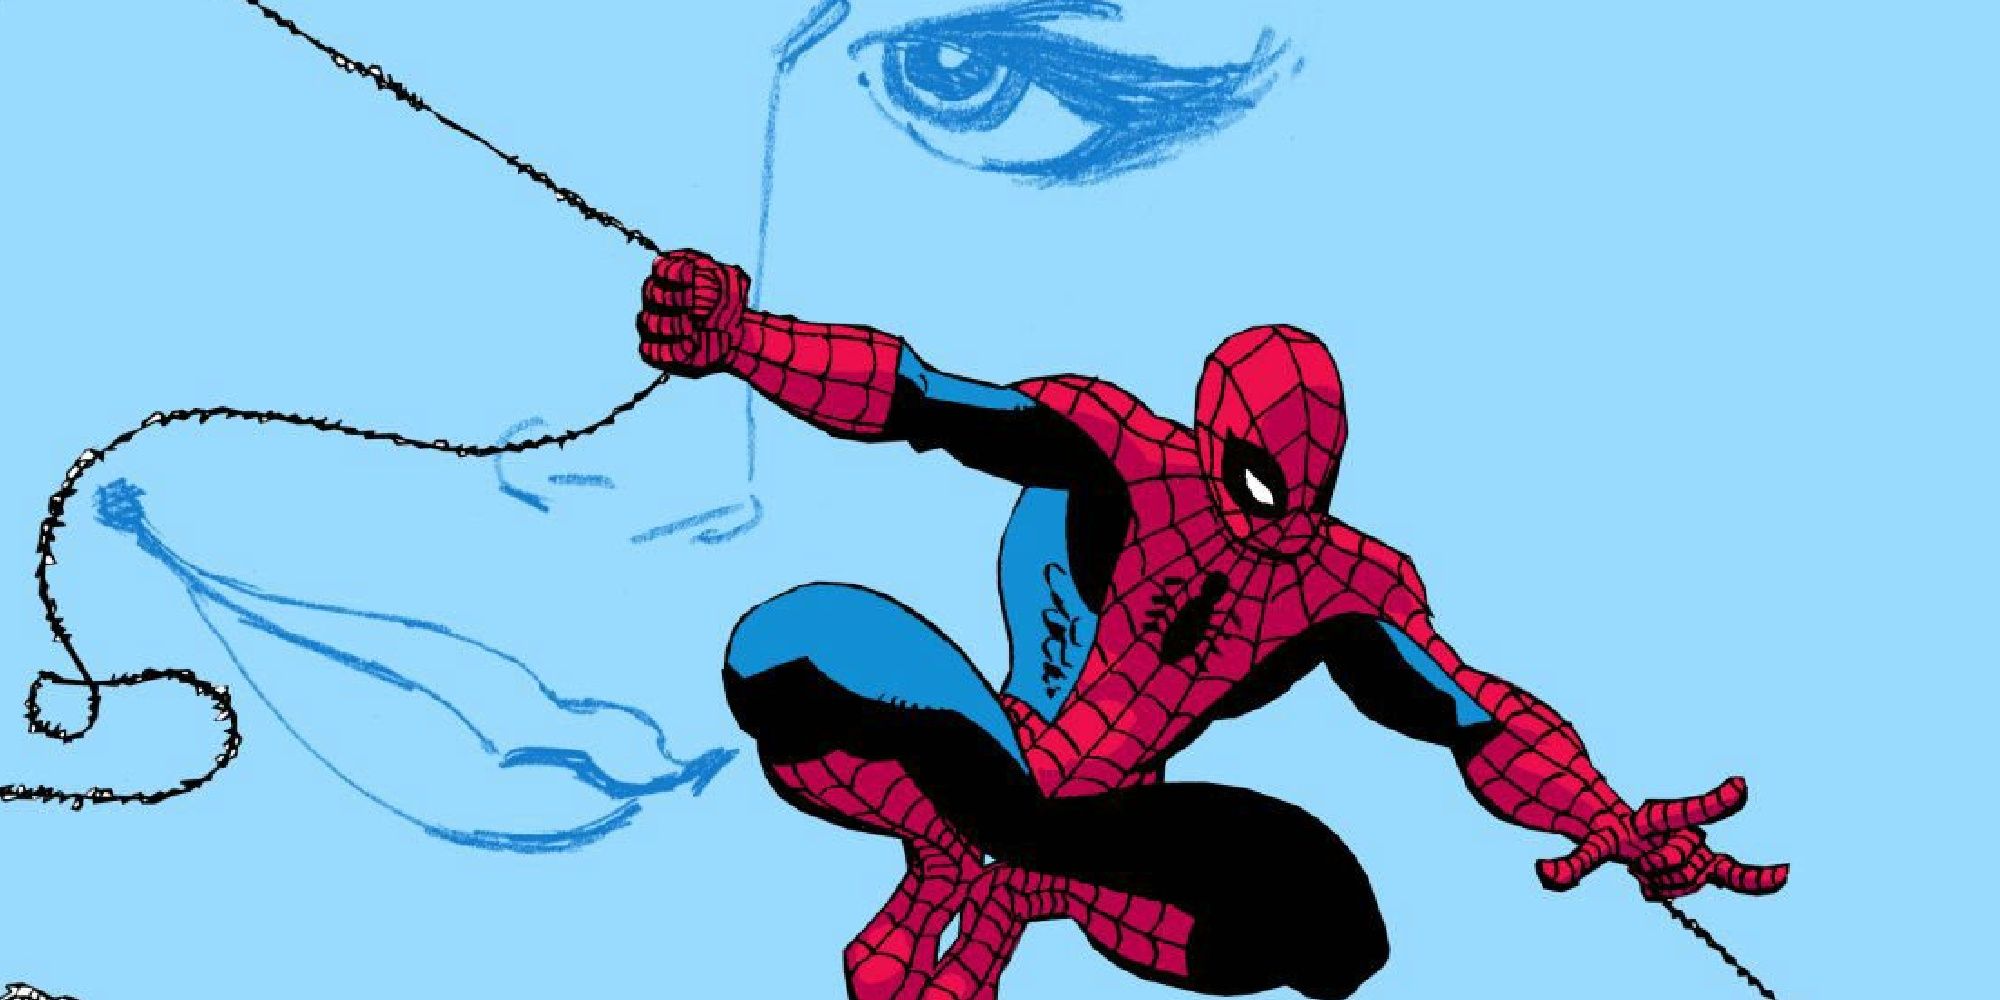 Spider Man swings in the air in Marvel Comics.